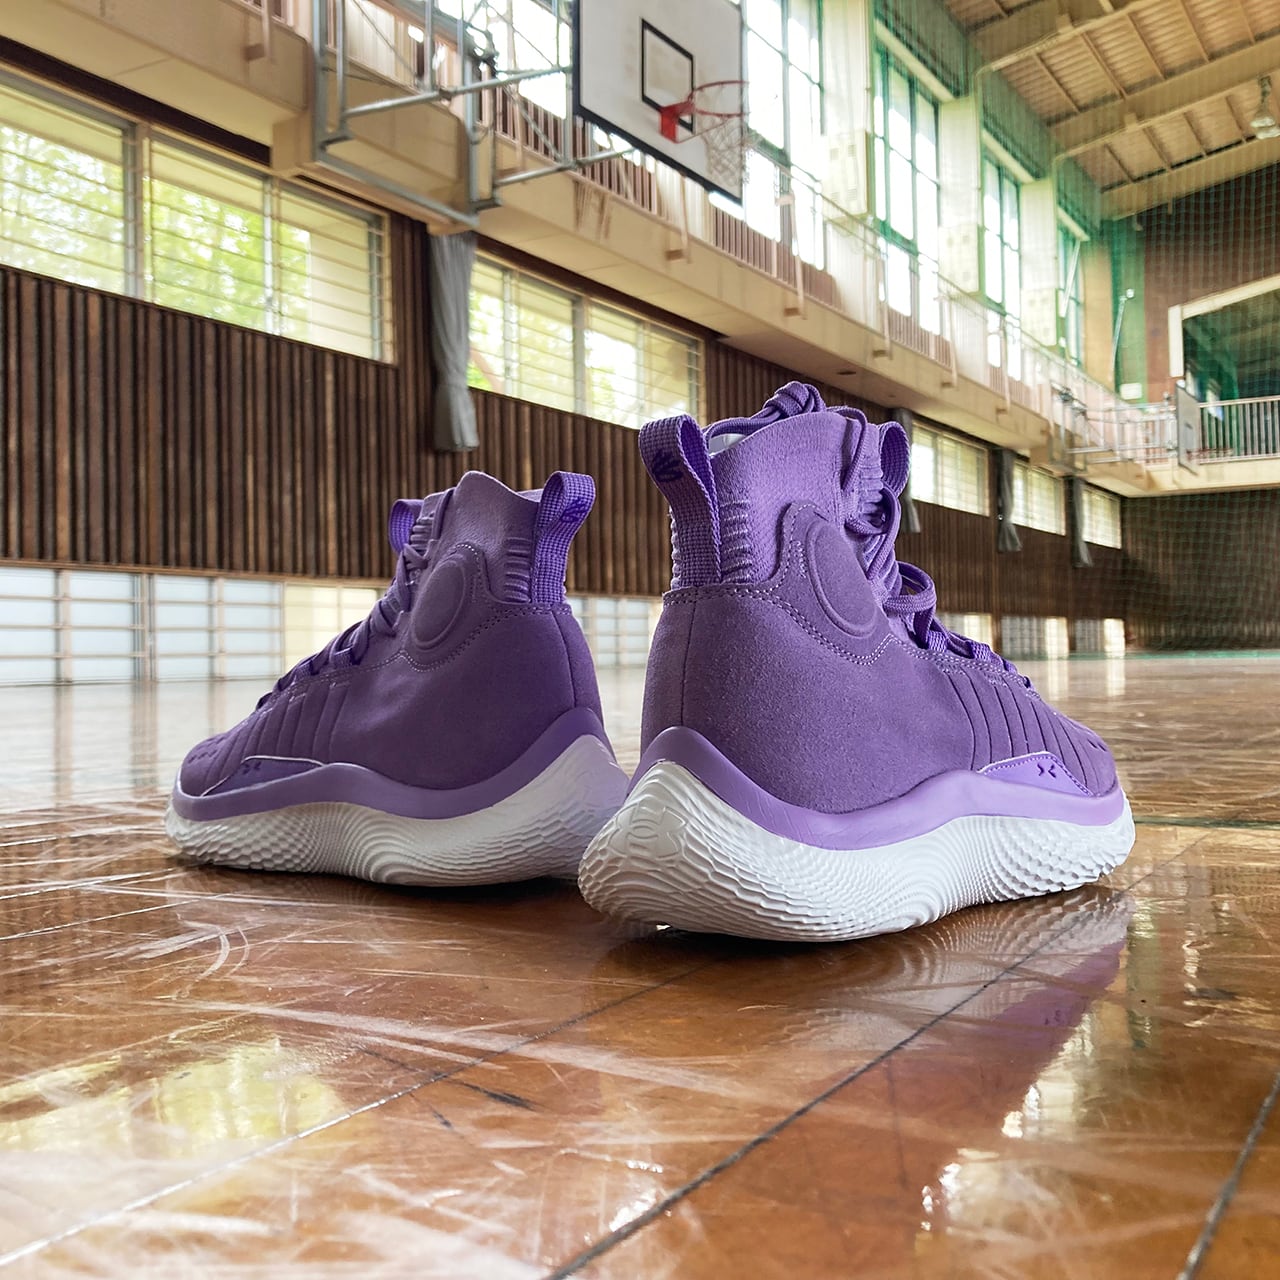 Under Armour Curry 4 Flotro アンダーアーマー カリー4 フロトロ ...